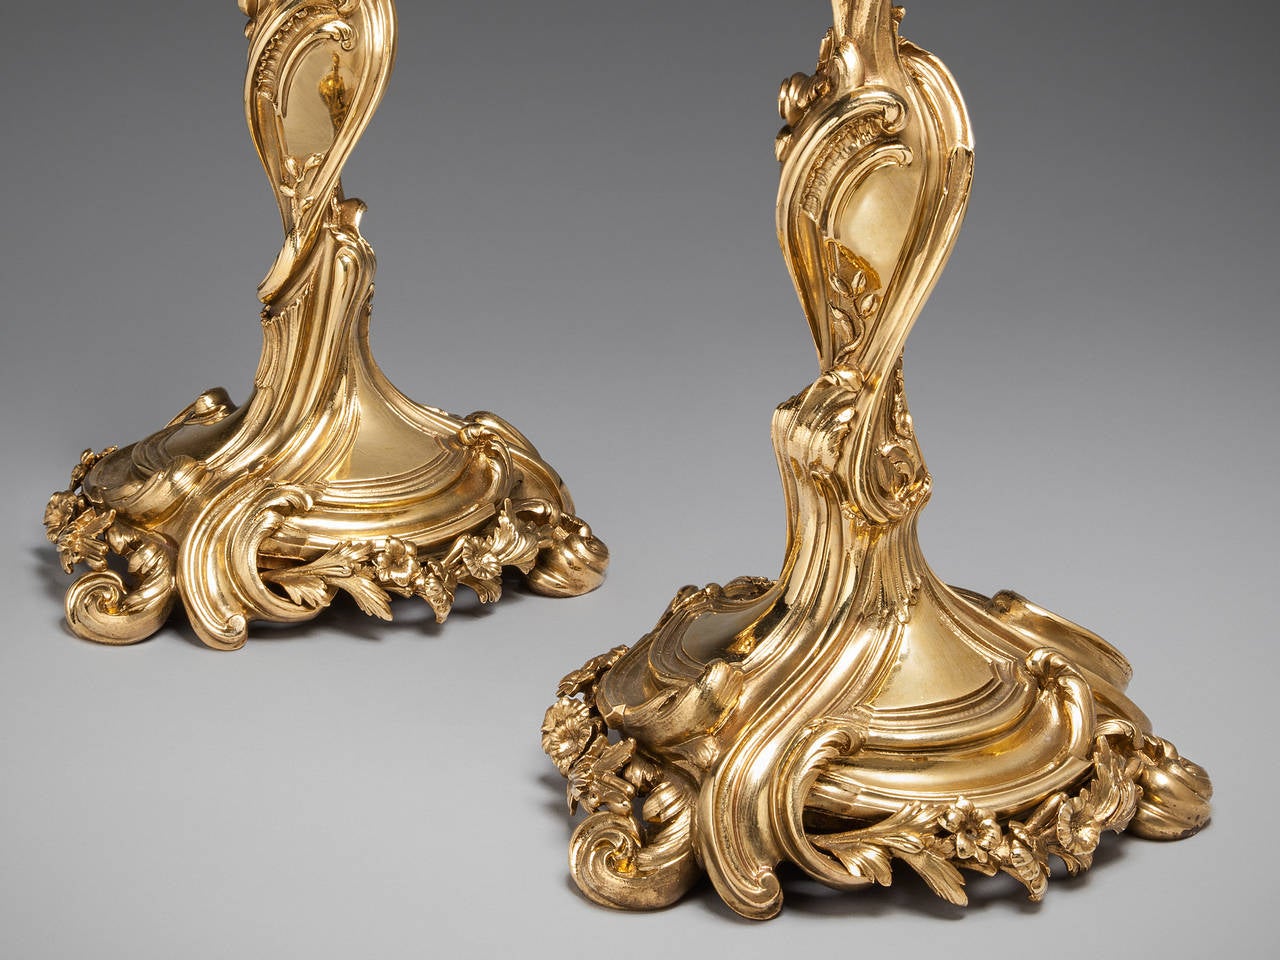 French Pair of Rococo Revival Candlesticks For Sale